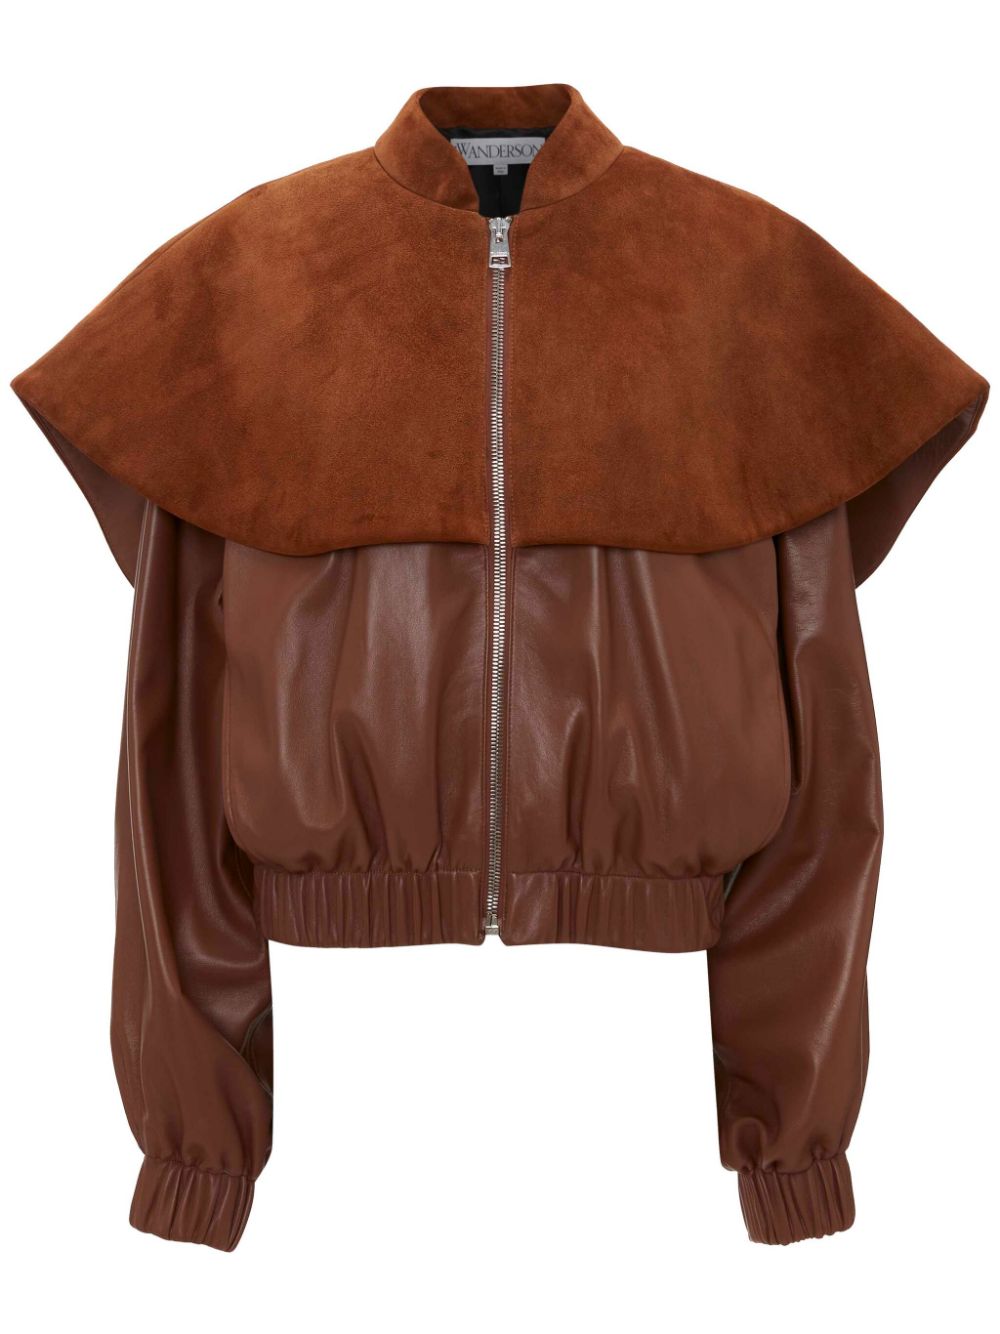 JW Anderson cape-style leather jacket - Brown